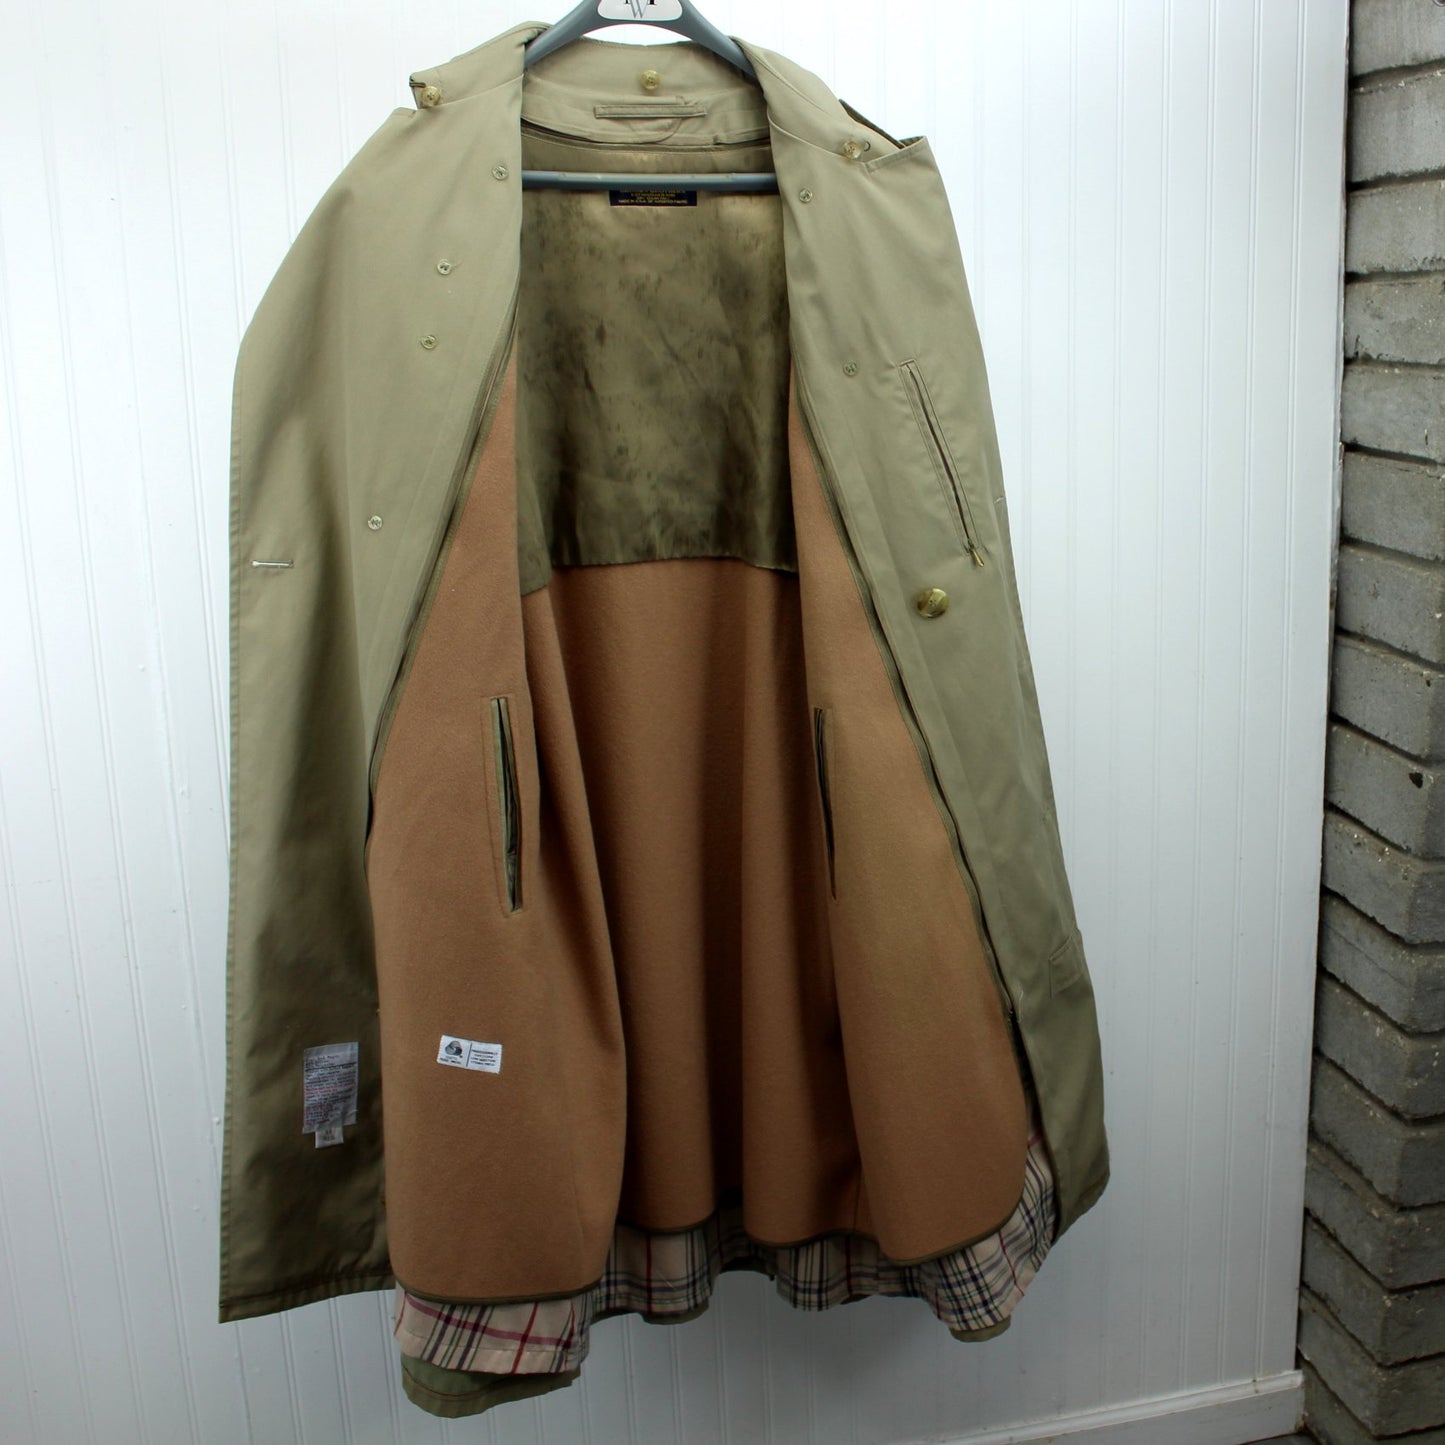 Brooks Bros Vtg Mens Trench Coat Poplin Wool Zip Lining Dupont Zepel Great Detail 38 Reg inside view all layers